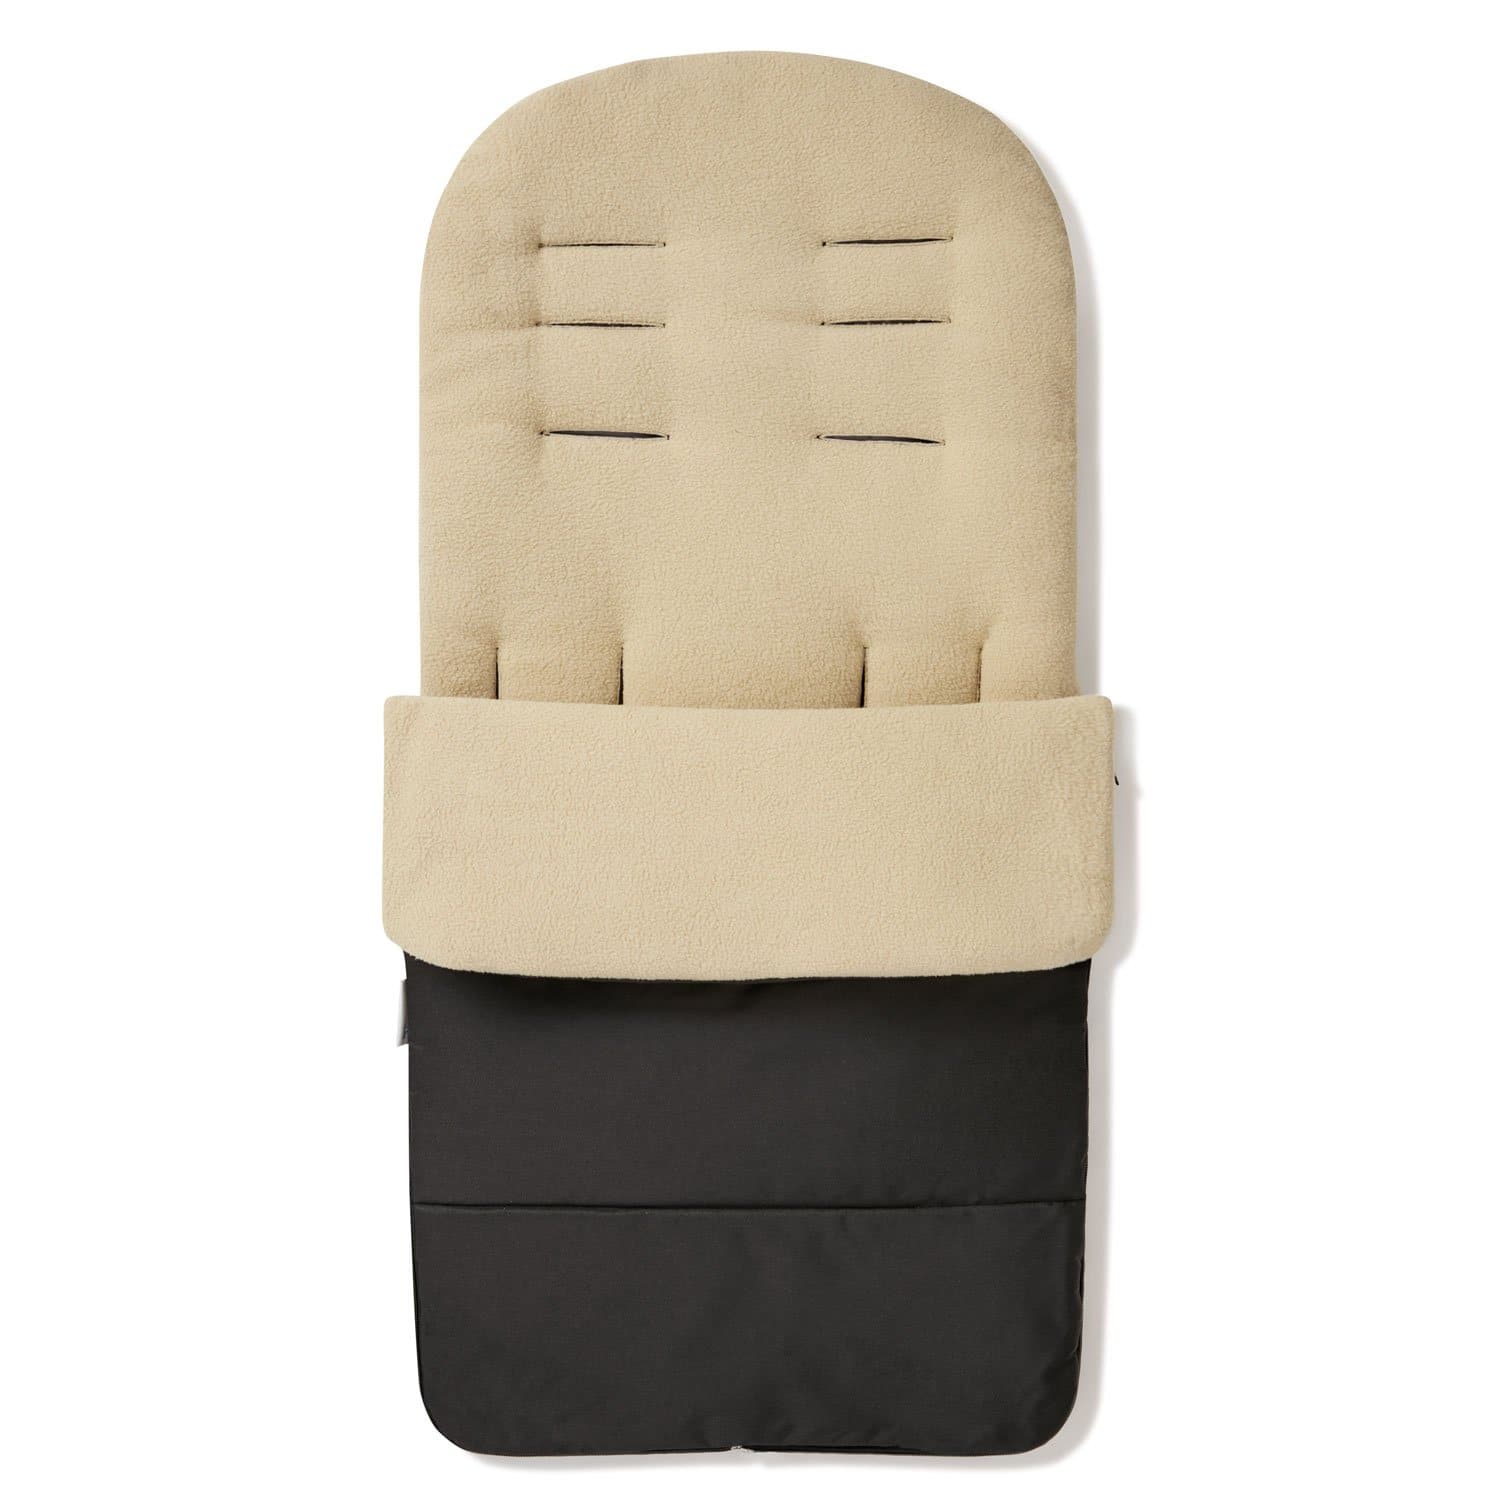 Premium Footmuff / Cosy Toes Compatible with Joolz - Desert Sand / Fits All Models | For Your Little One